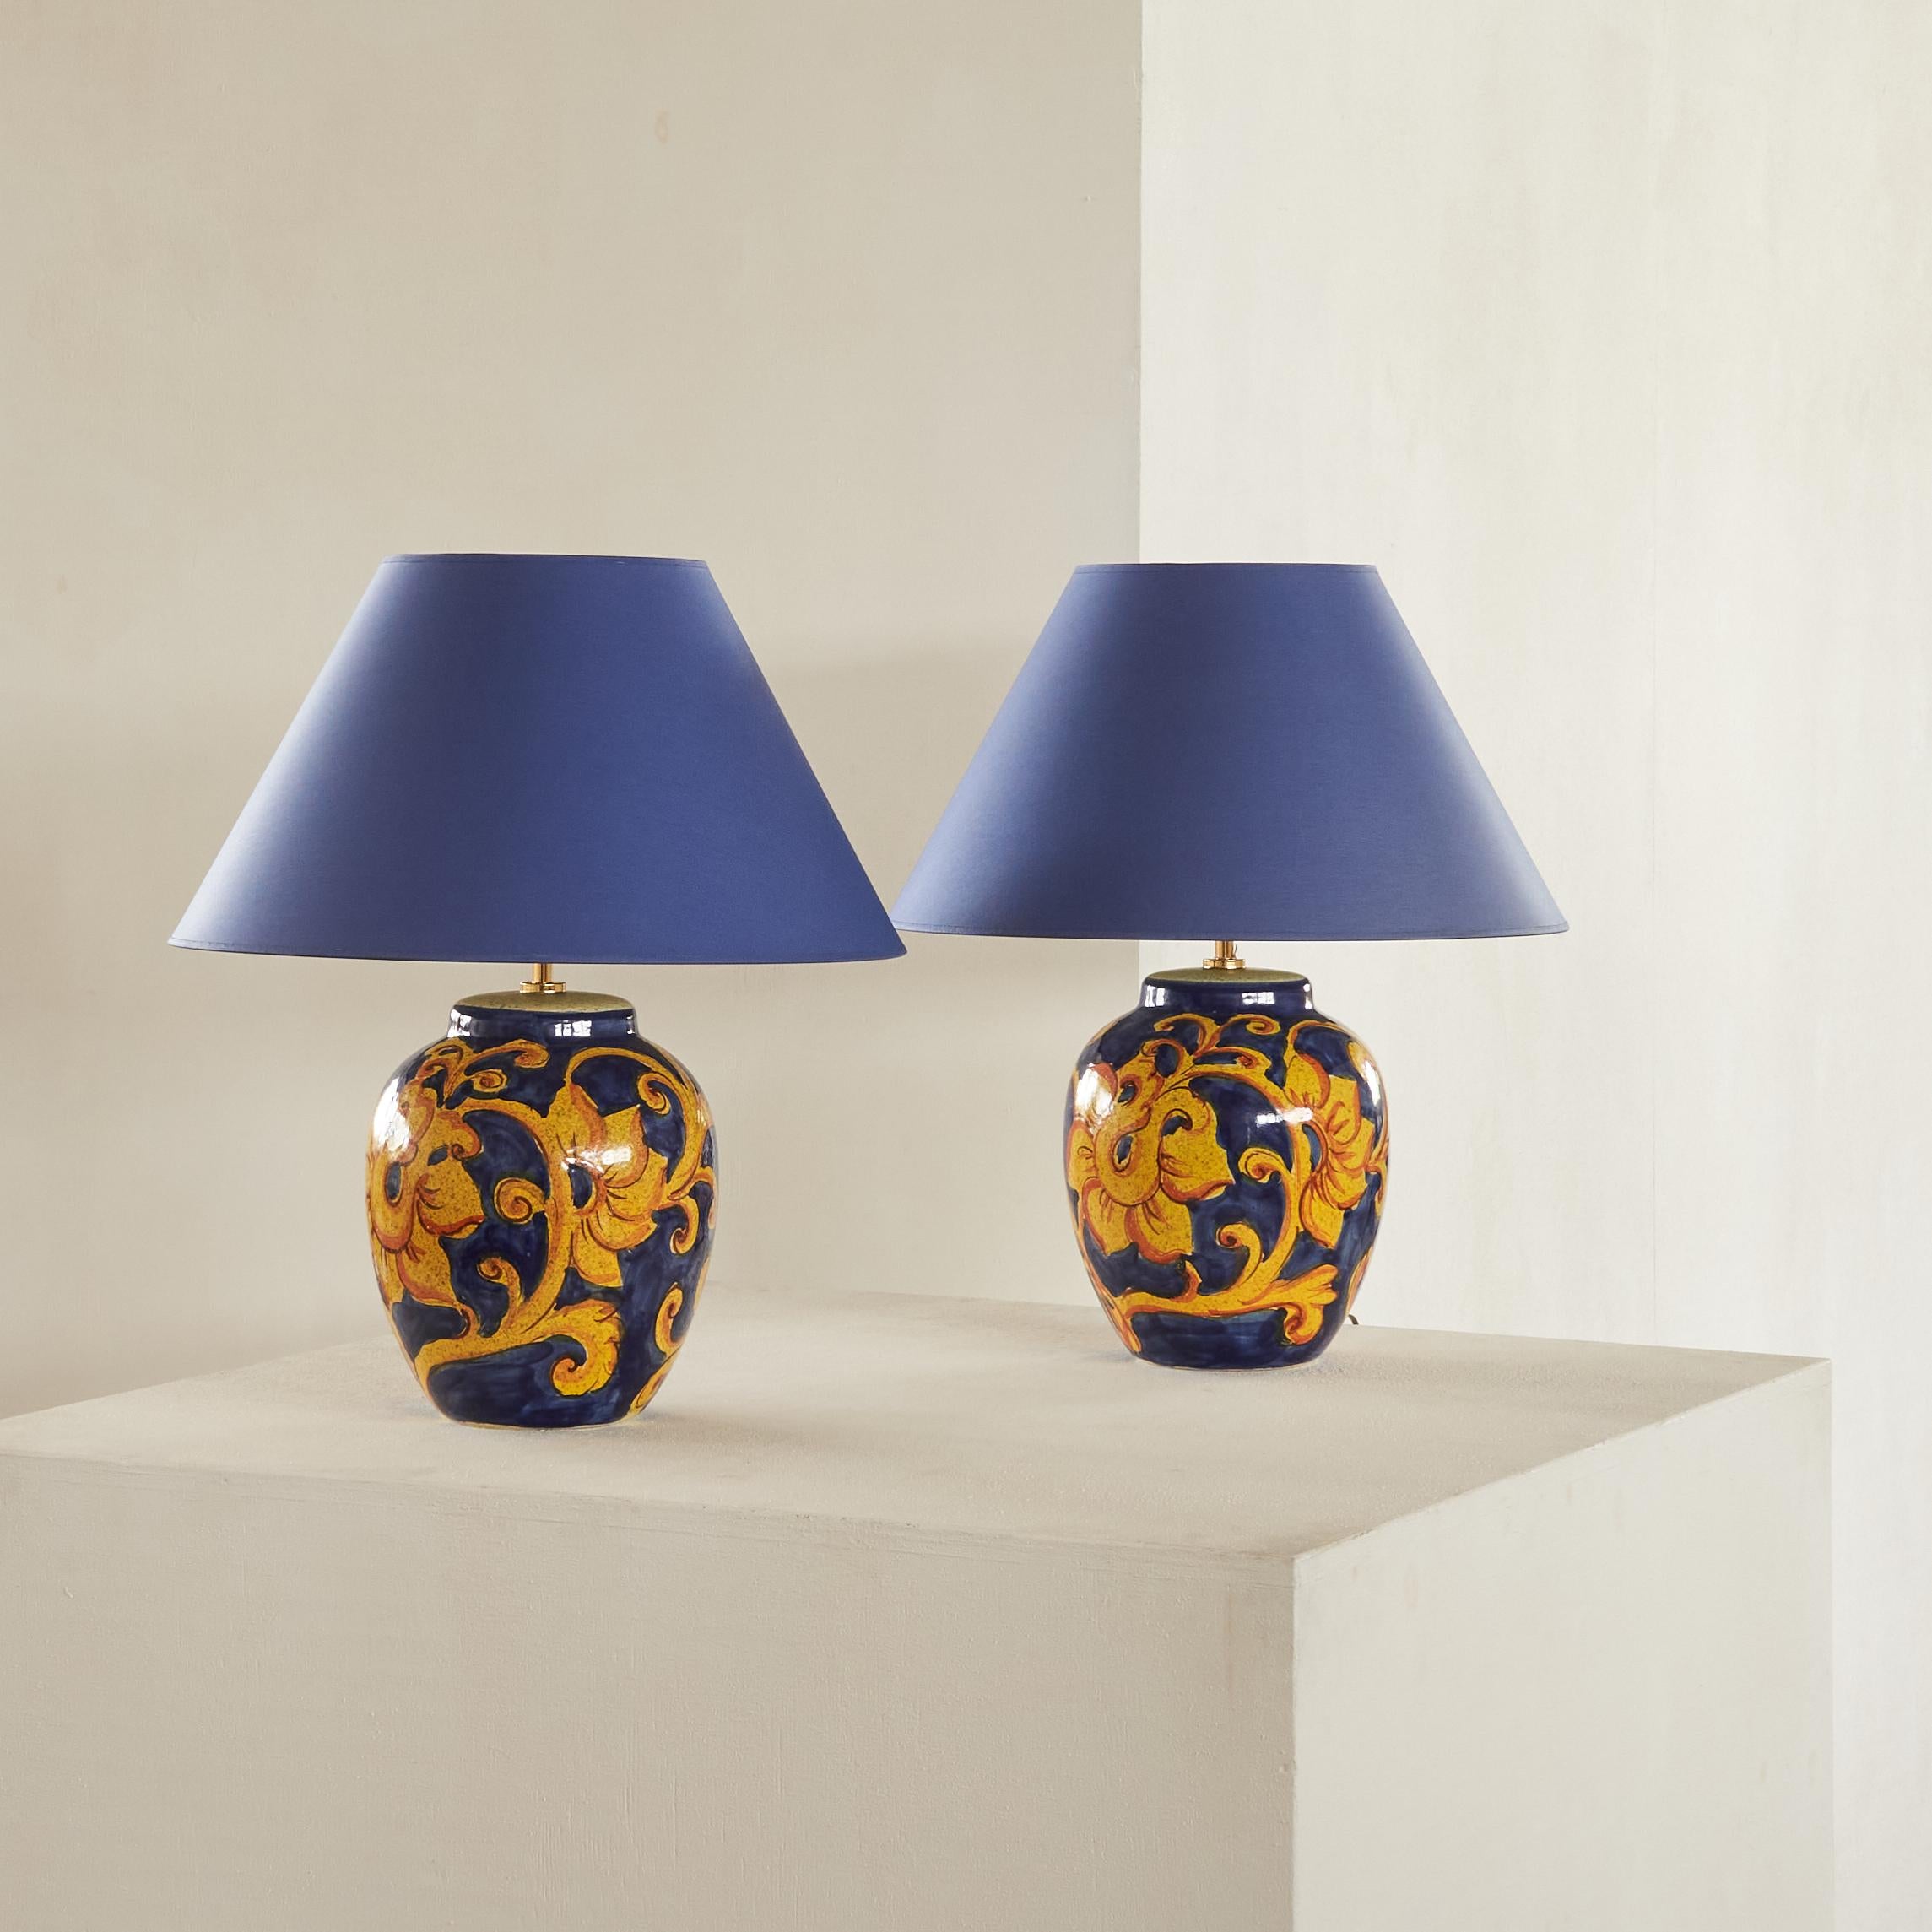 Pair of French Hand Painted Ceramic Table Lamps with Floral Decor 1980s

This is a wonderful pair of French hand painted high quality table lamps with blue shades. A delightful and very elegant pair of lamps. Wonderful stylish and colorful decor